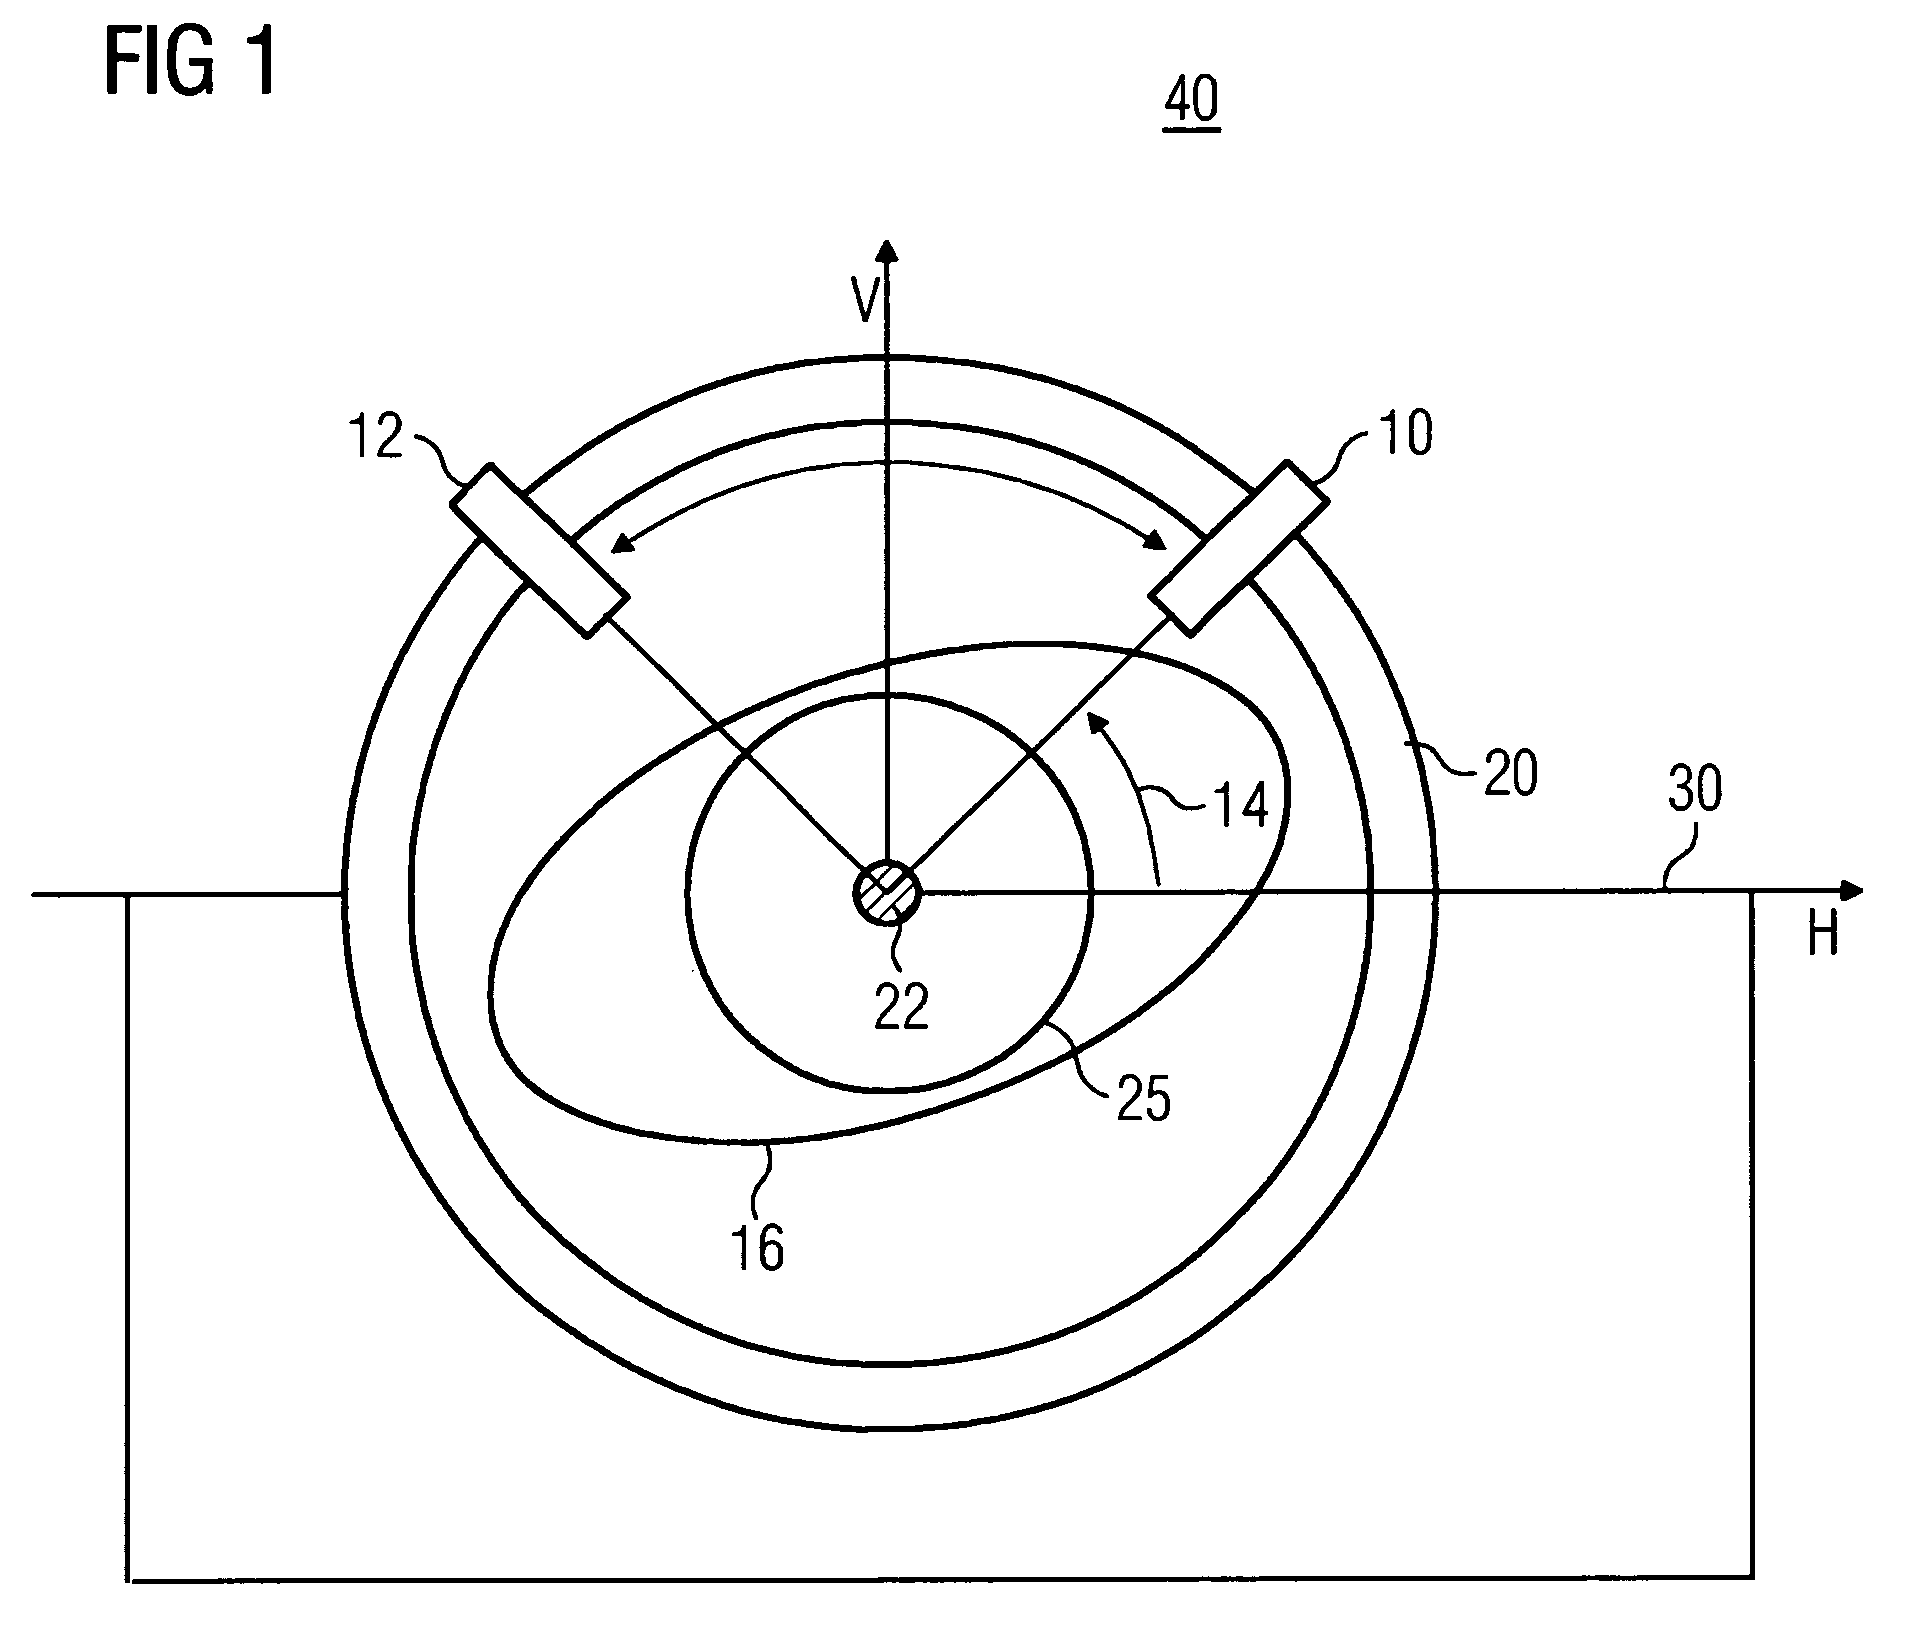 Method and device for monitoring the dynamic behavior of a rotating shaft, in particular of a gas or steam turbine